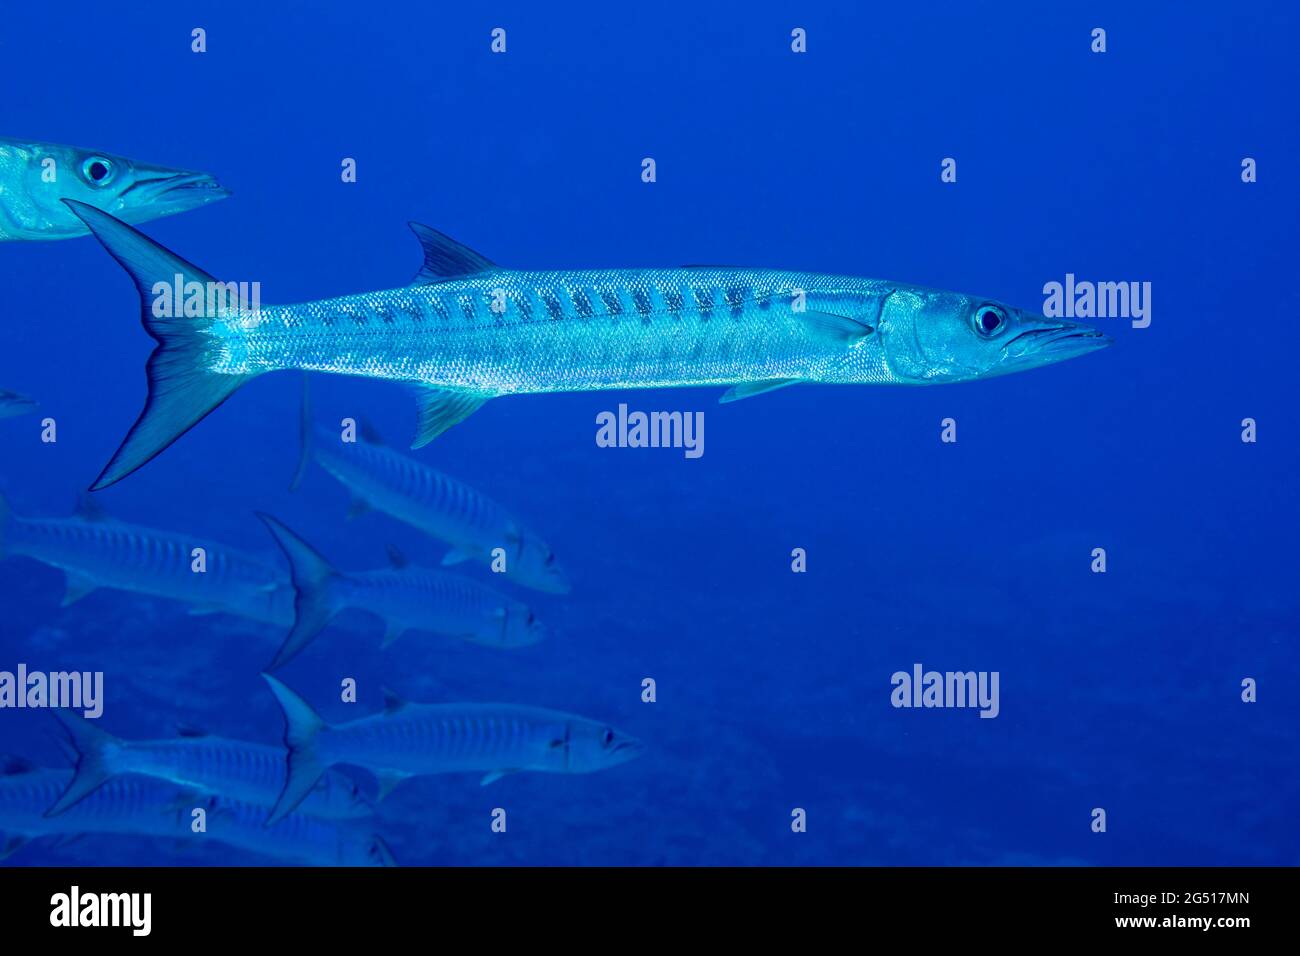 Blackfin barracuda, Sphyraena genie, form large schools on the seaward side of the reef and are also referred to as chevron barracuda, Yap, Micronesia Stock Photo